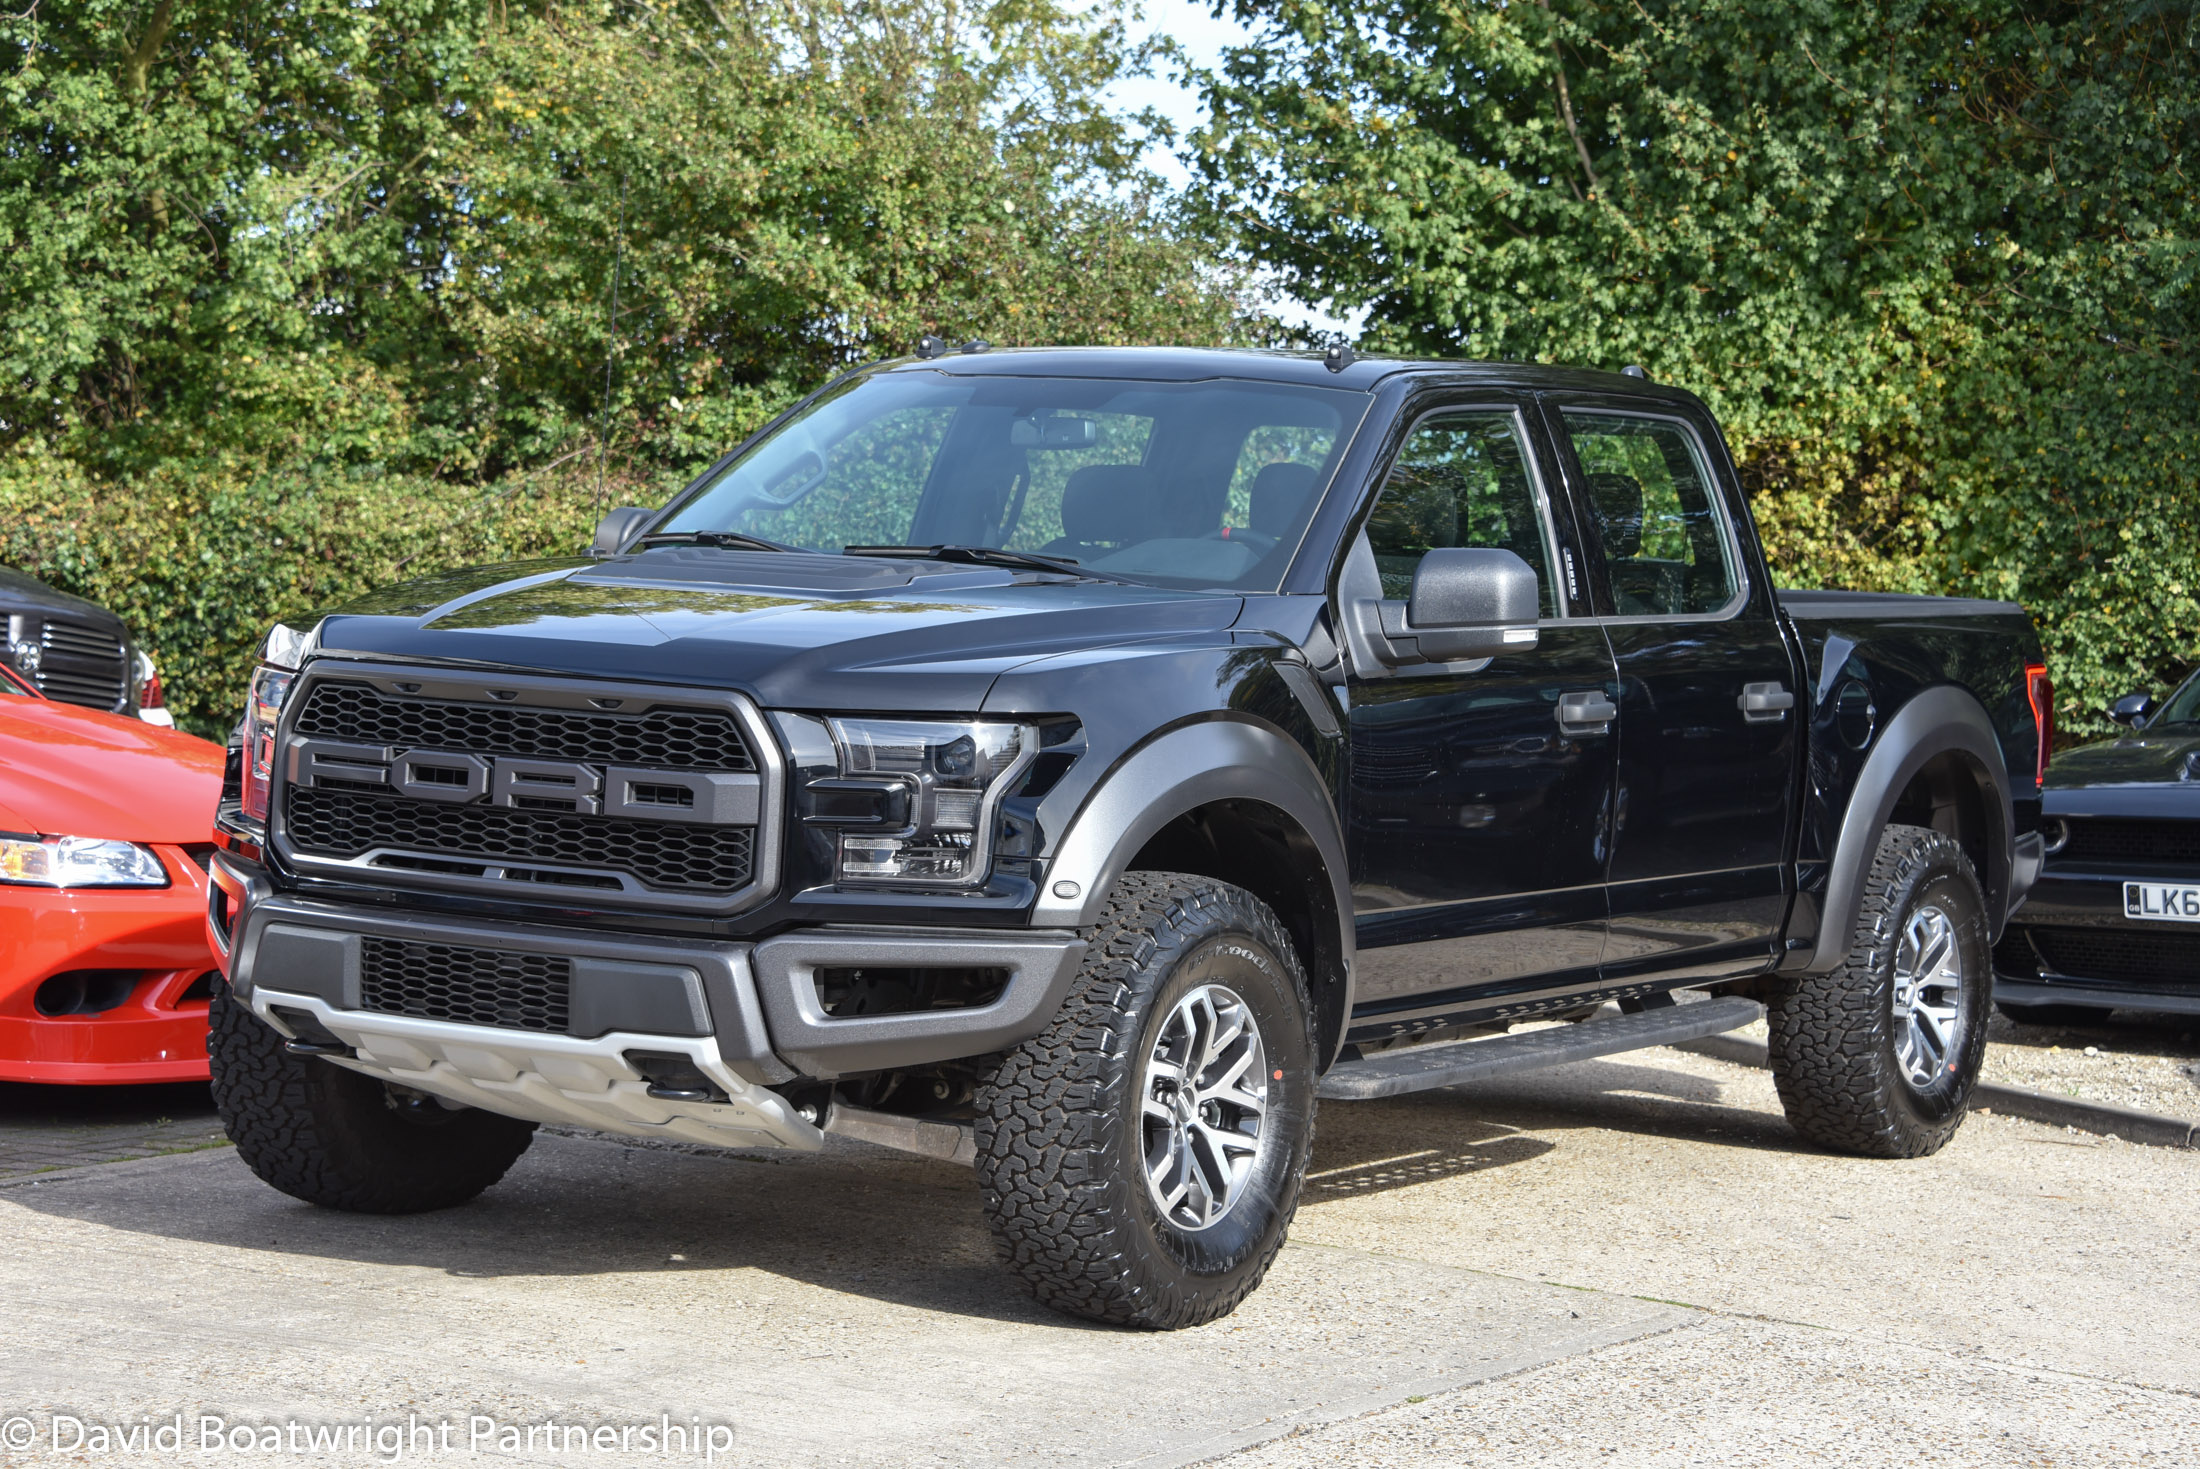 Dodge Ram | Ford F150 | Ford Mustang | American vehicles in the UK